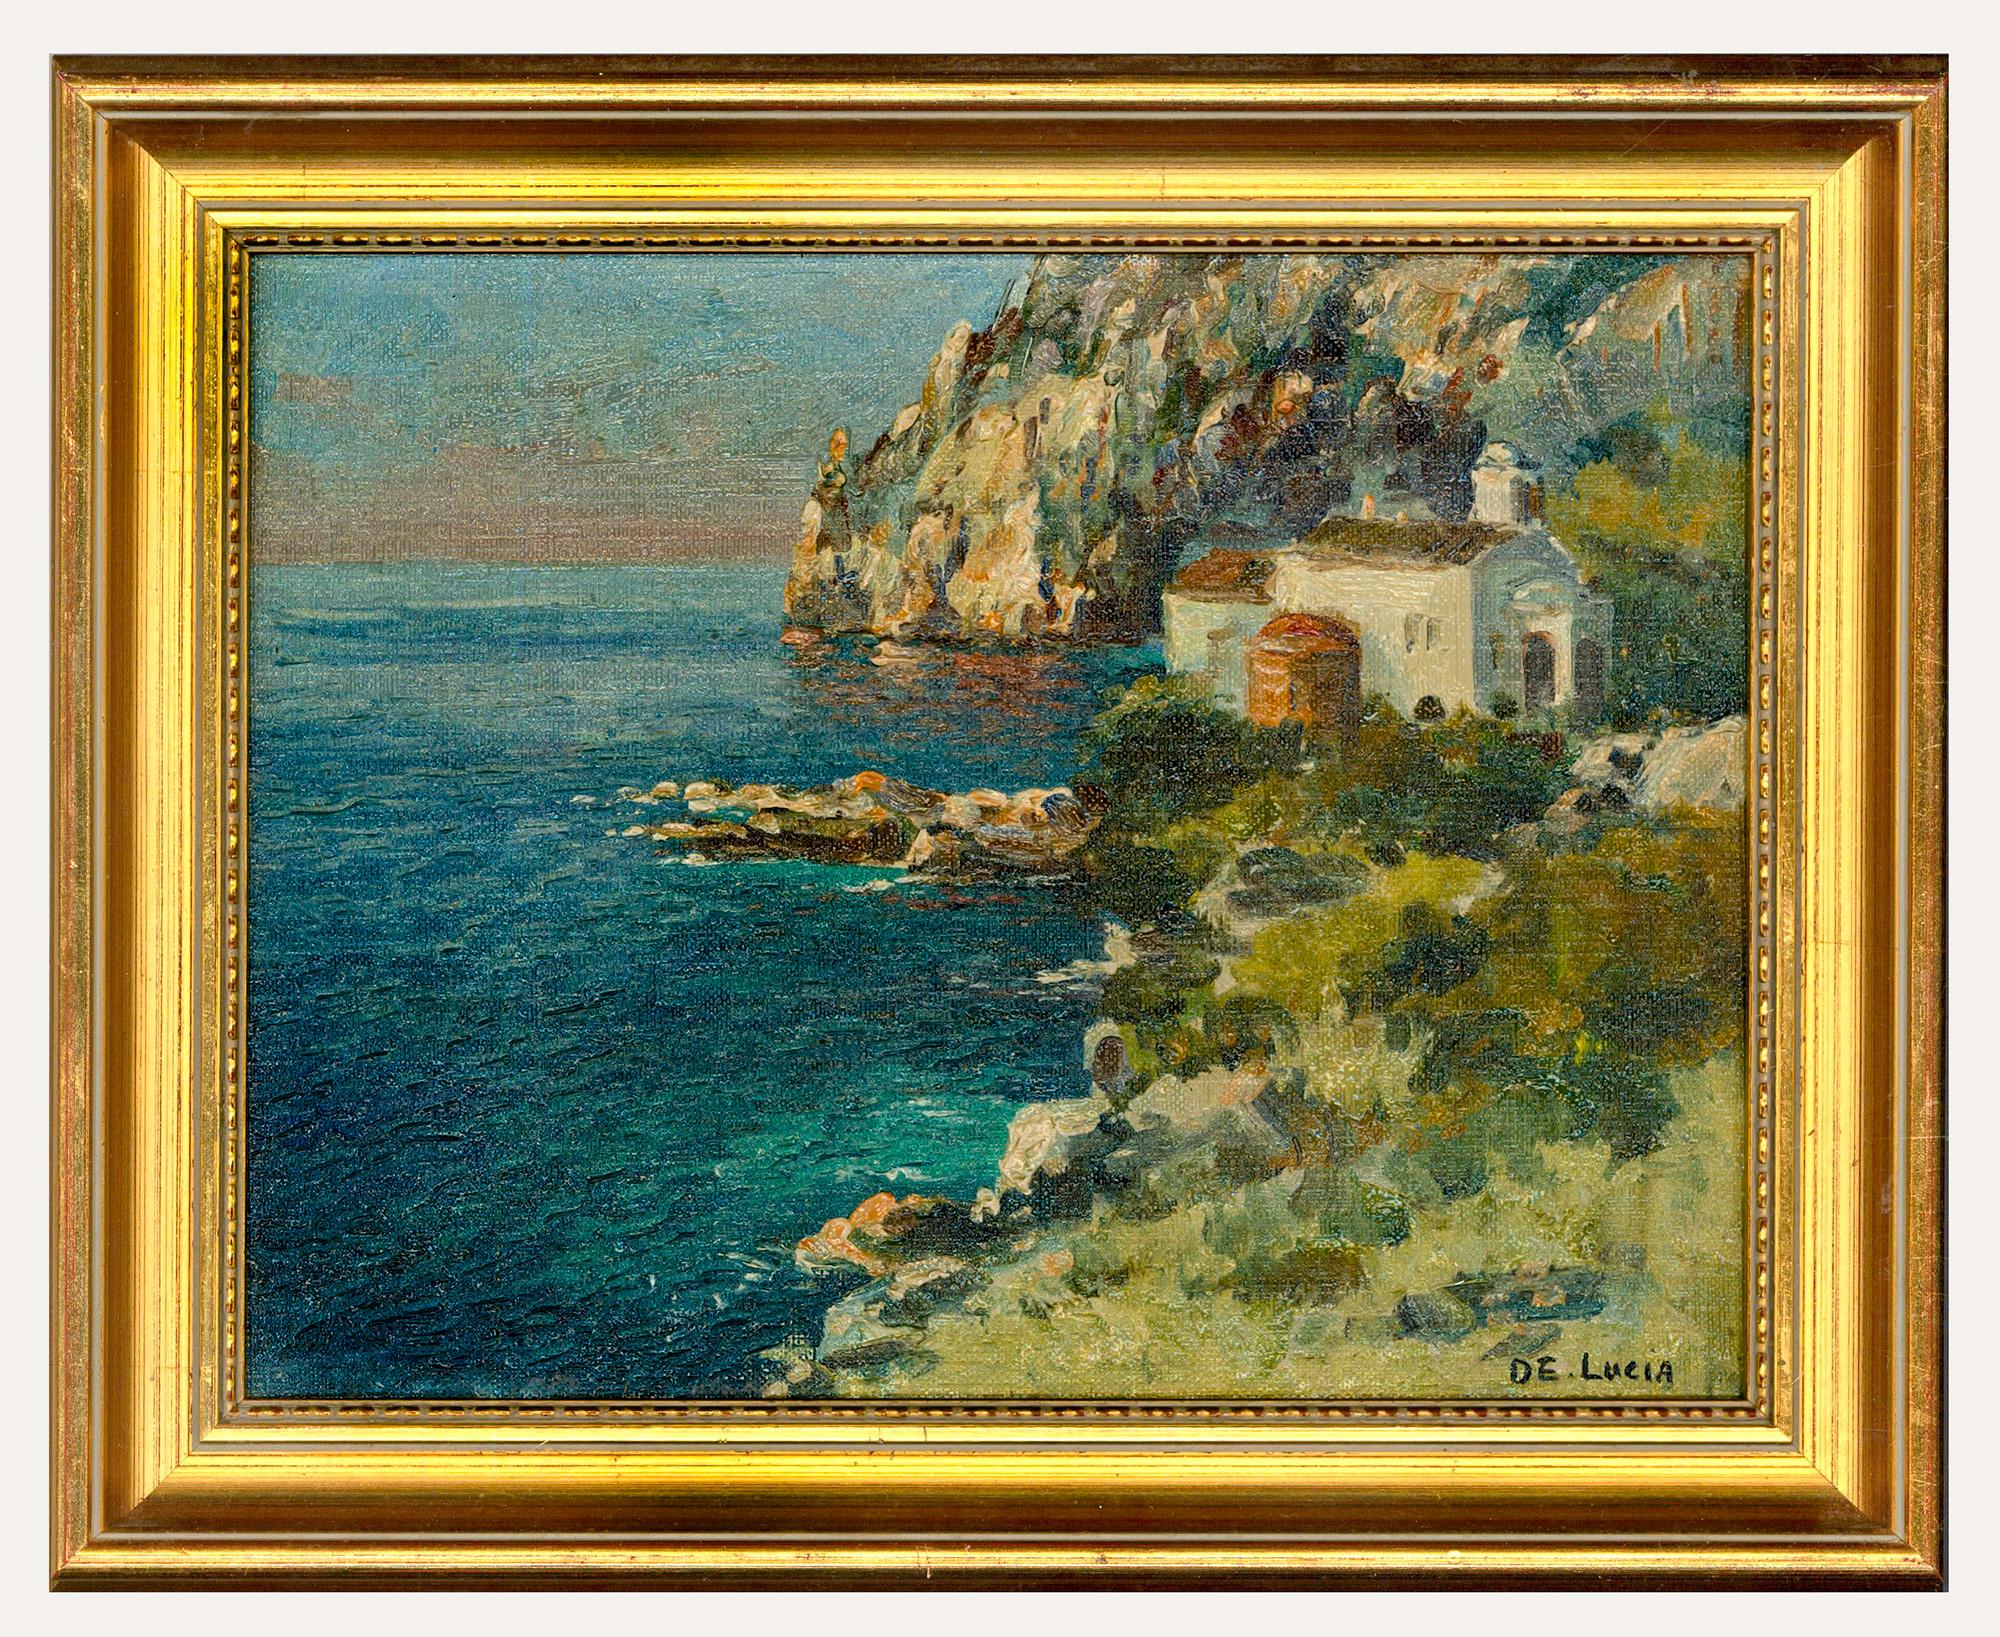 Unknown Figurative Painting - D. E. Lucia - Framed Contemporary Oil, Chapel by the Coast